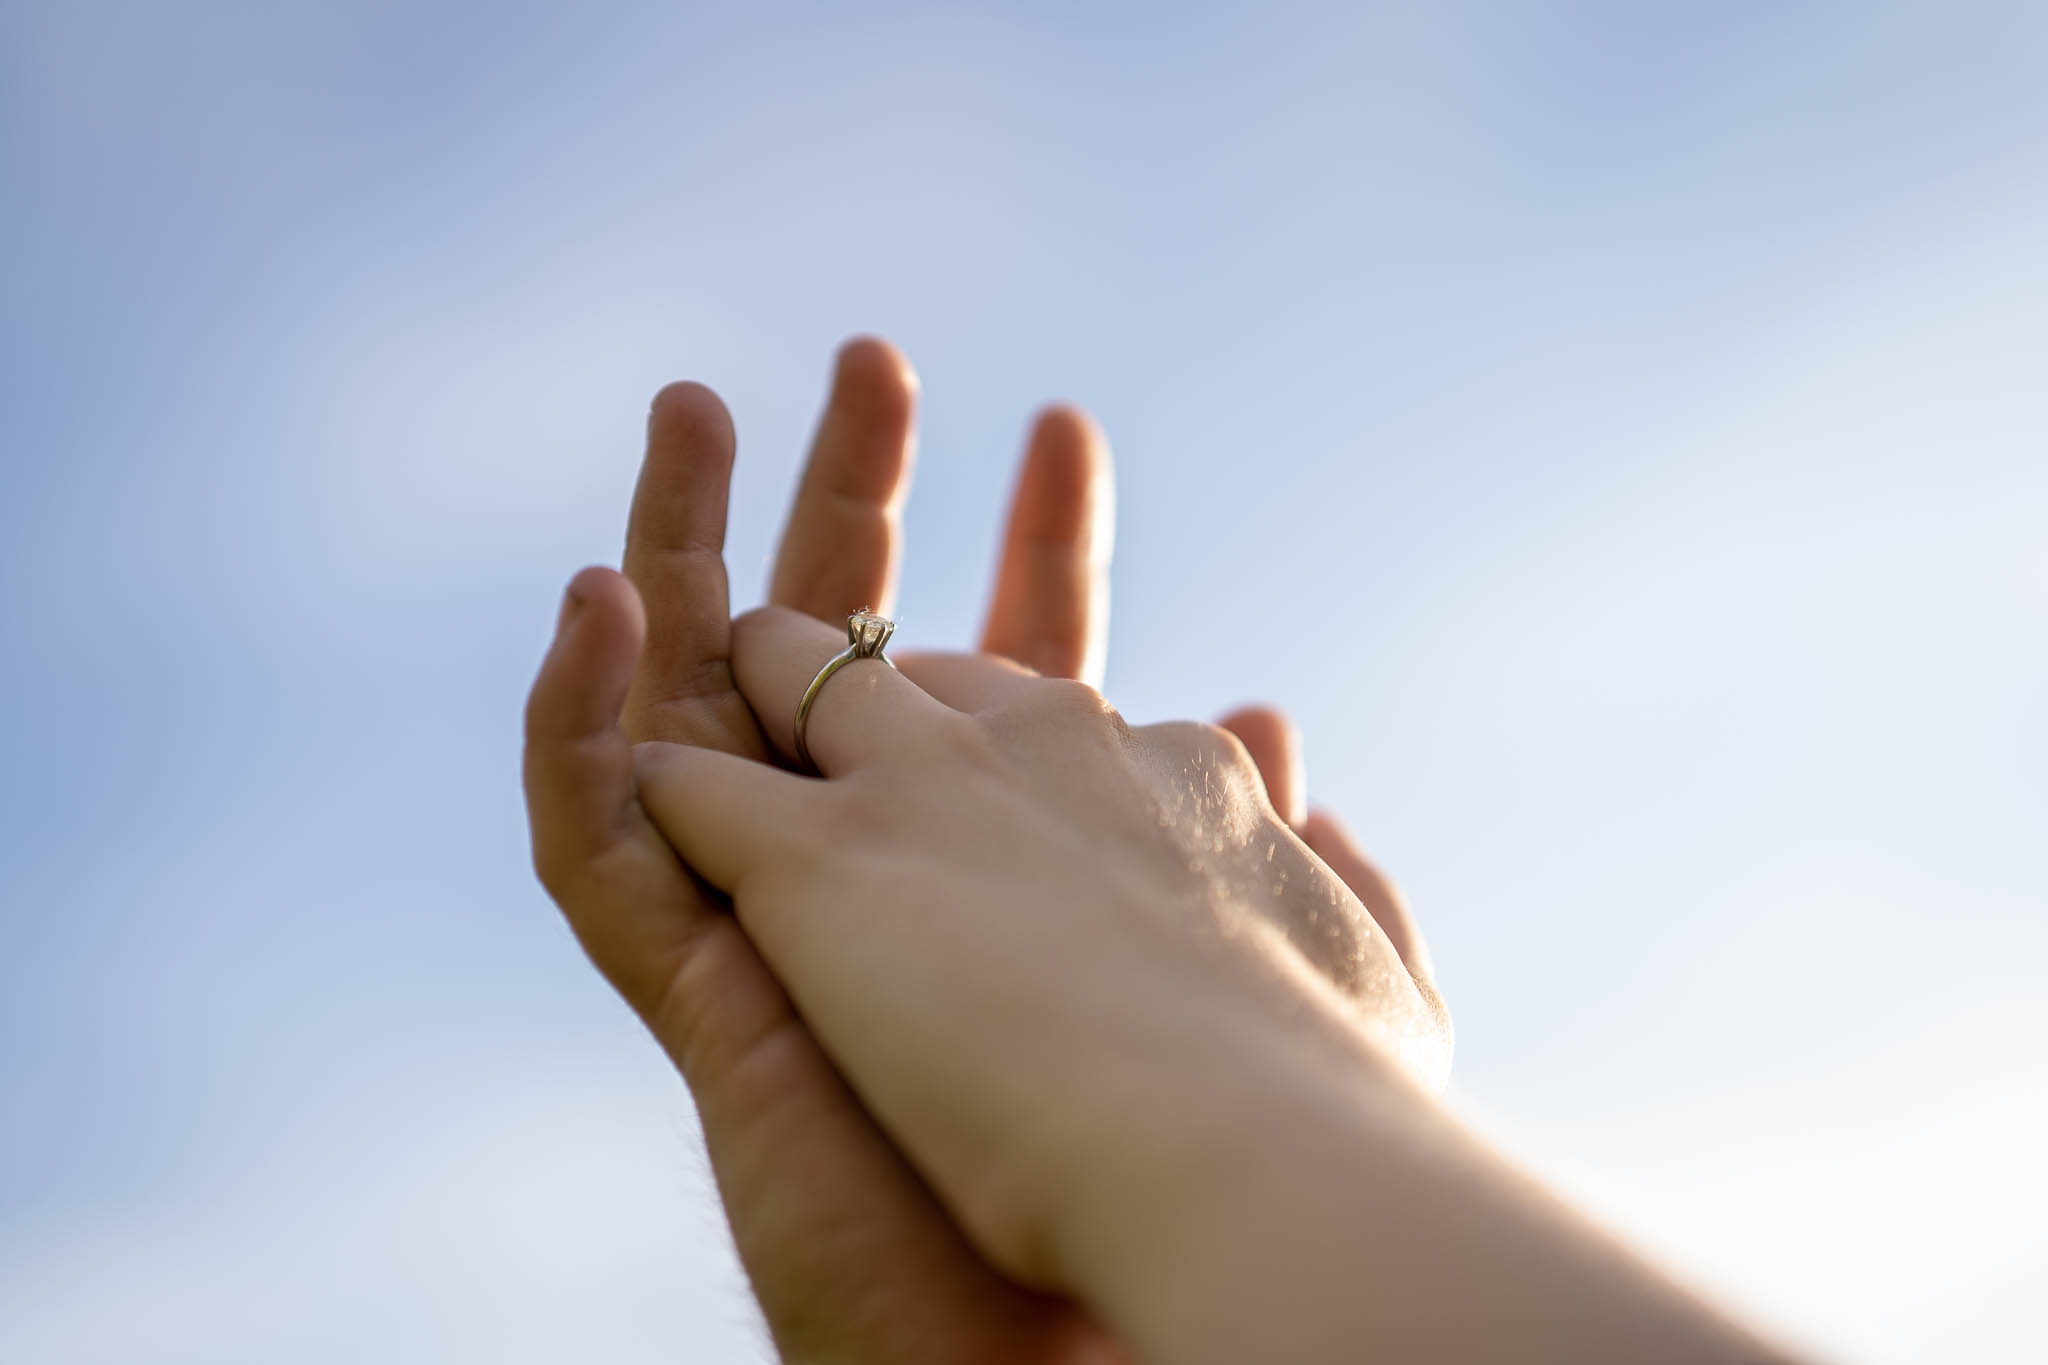 ThomasKim_photography K & S Engagement Session featuring hands reaching up against a blue sky.